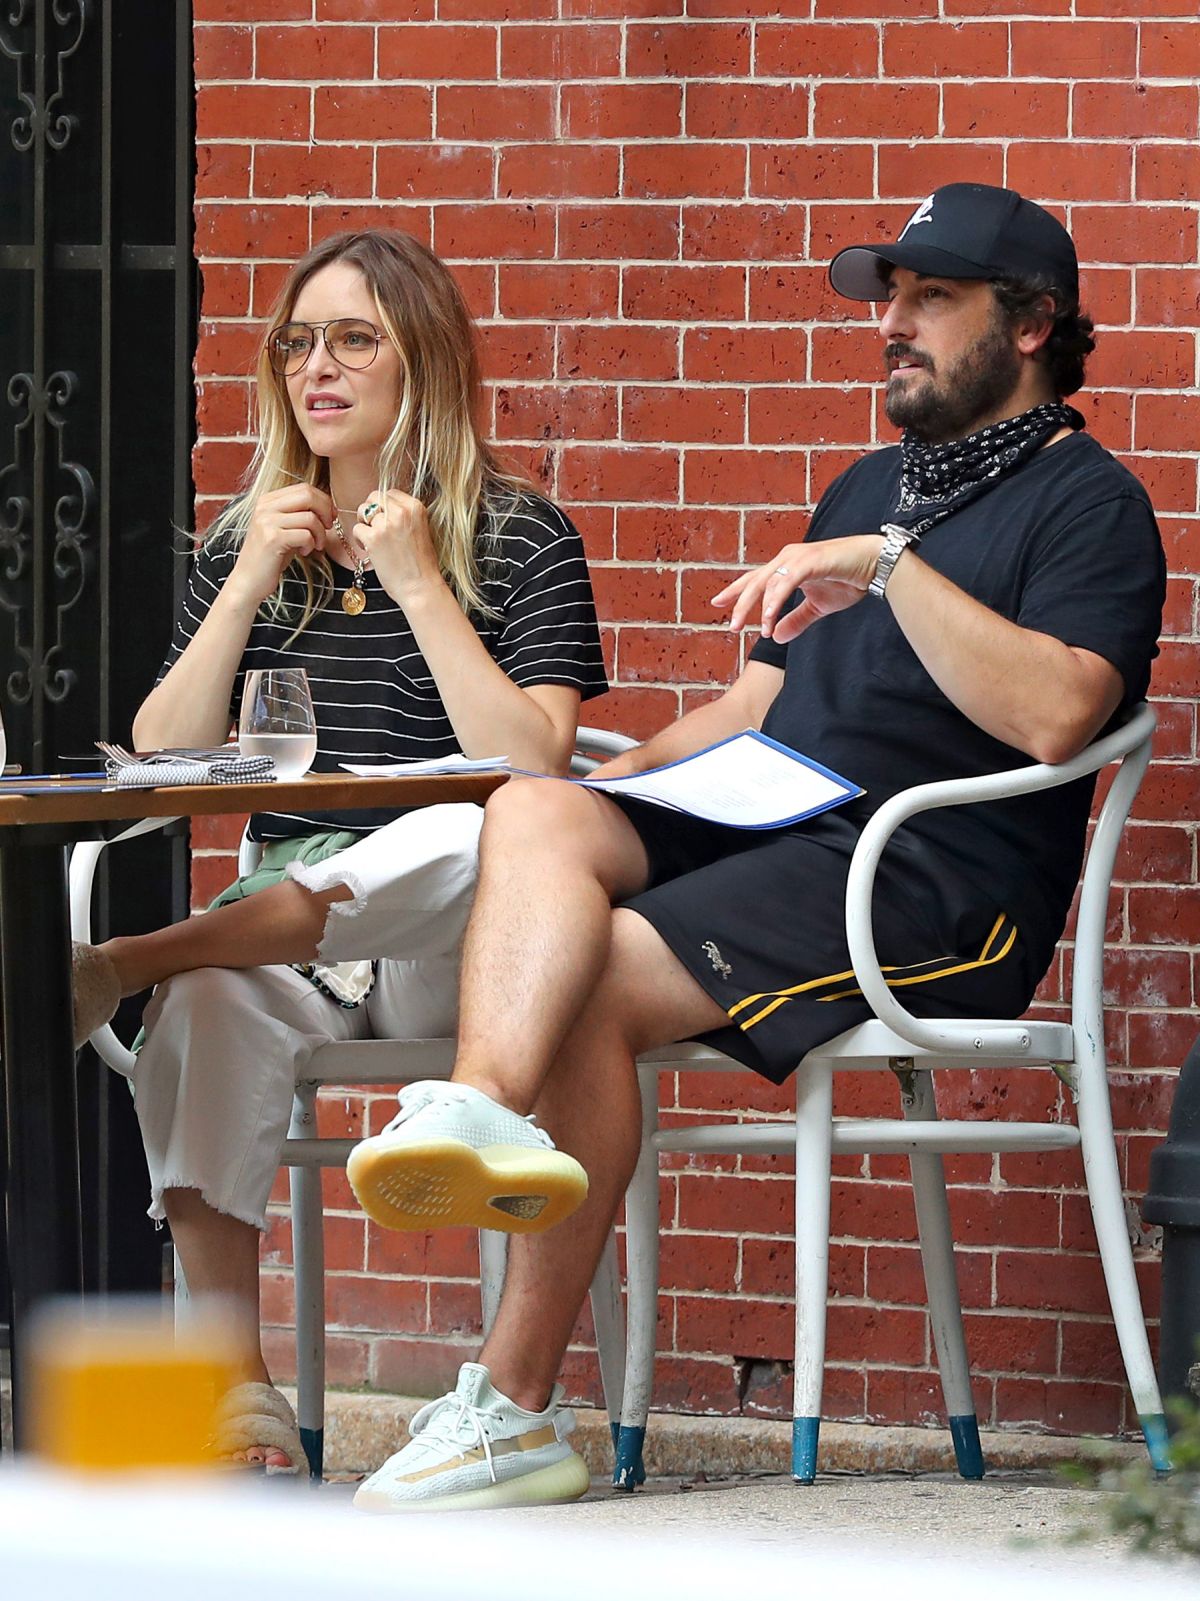 JENNY MOLLEN And Jason Biggs At A Cafe In New York HawtCelebs